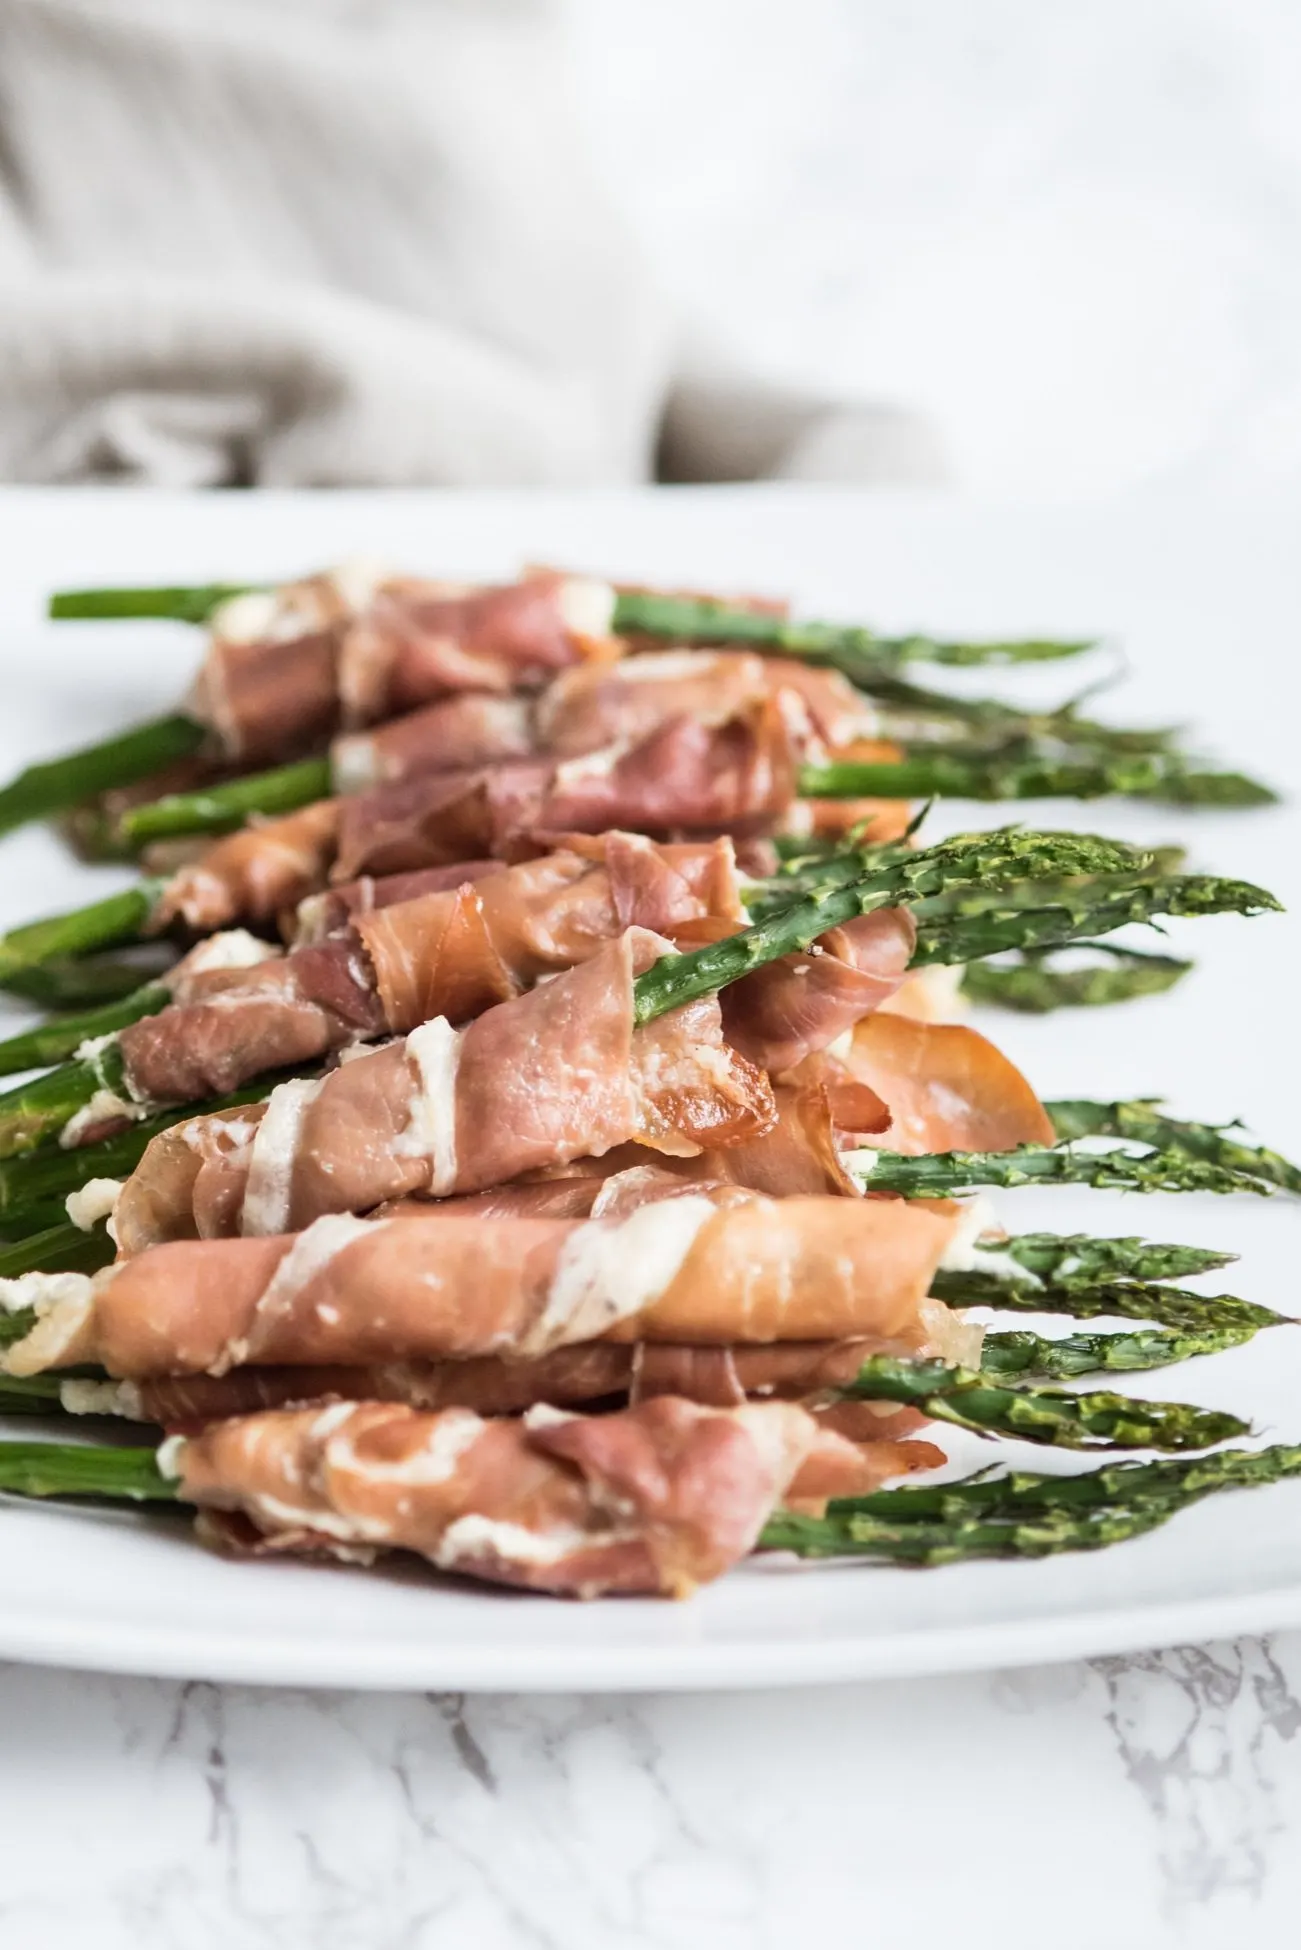 Prosciutto Wrapped Asparagus Recipe | Easy party appetizers, cocktail recipes, entertaining tips, party ideas and more from @cydconverse